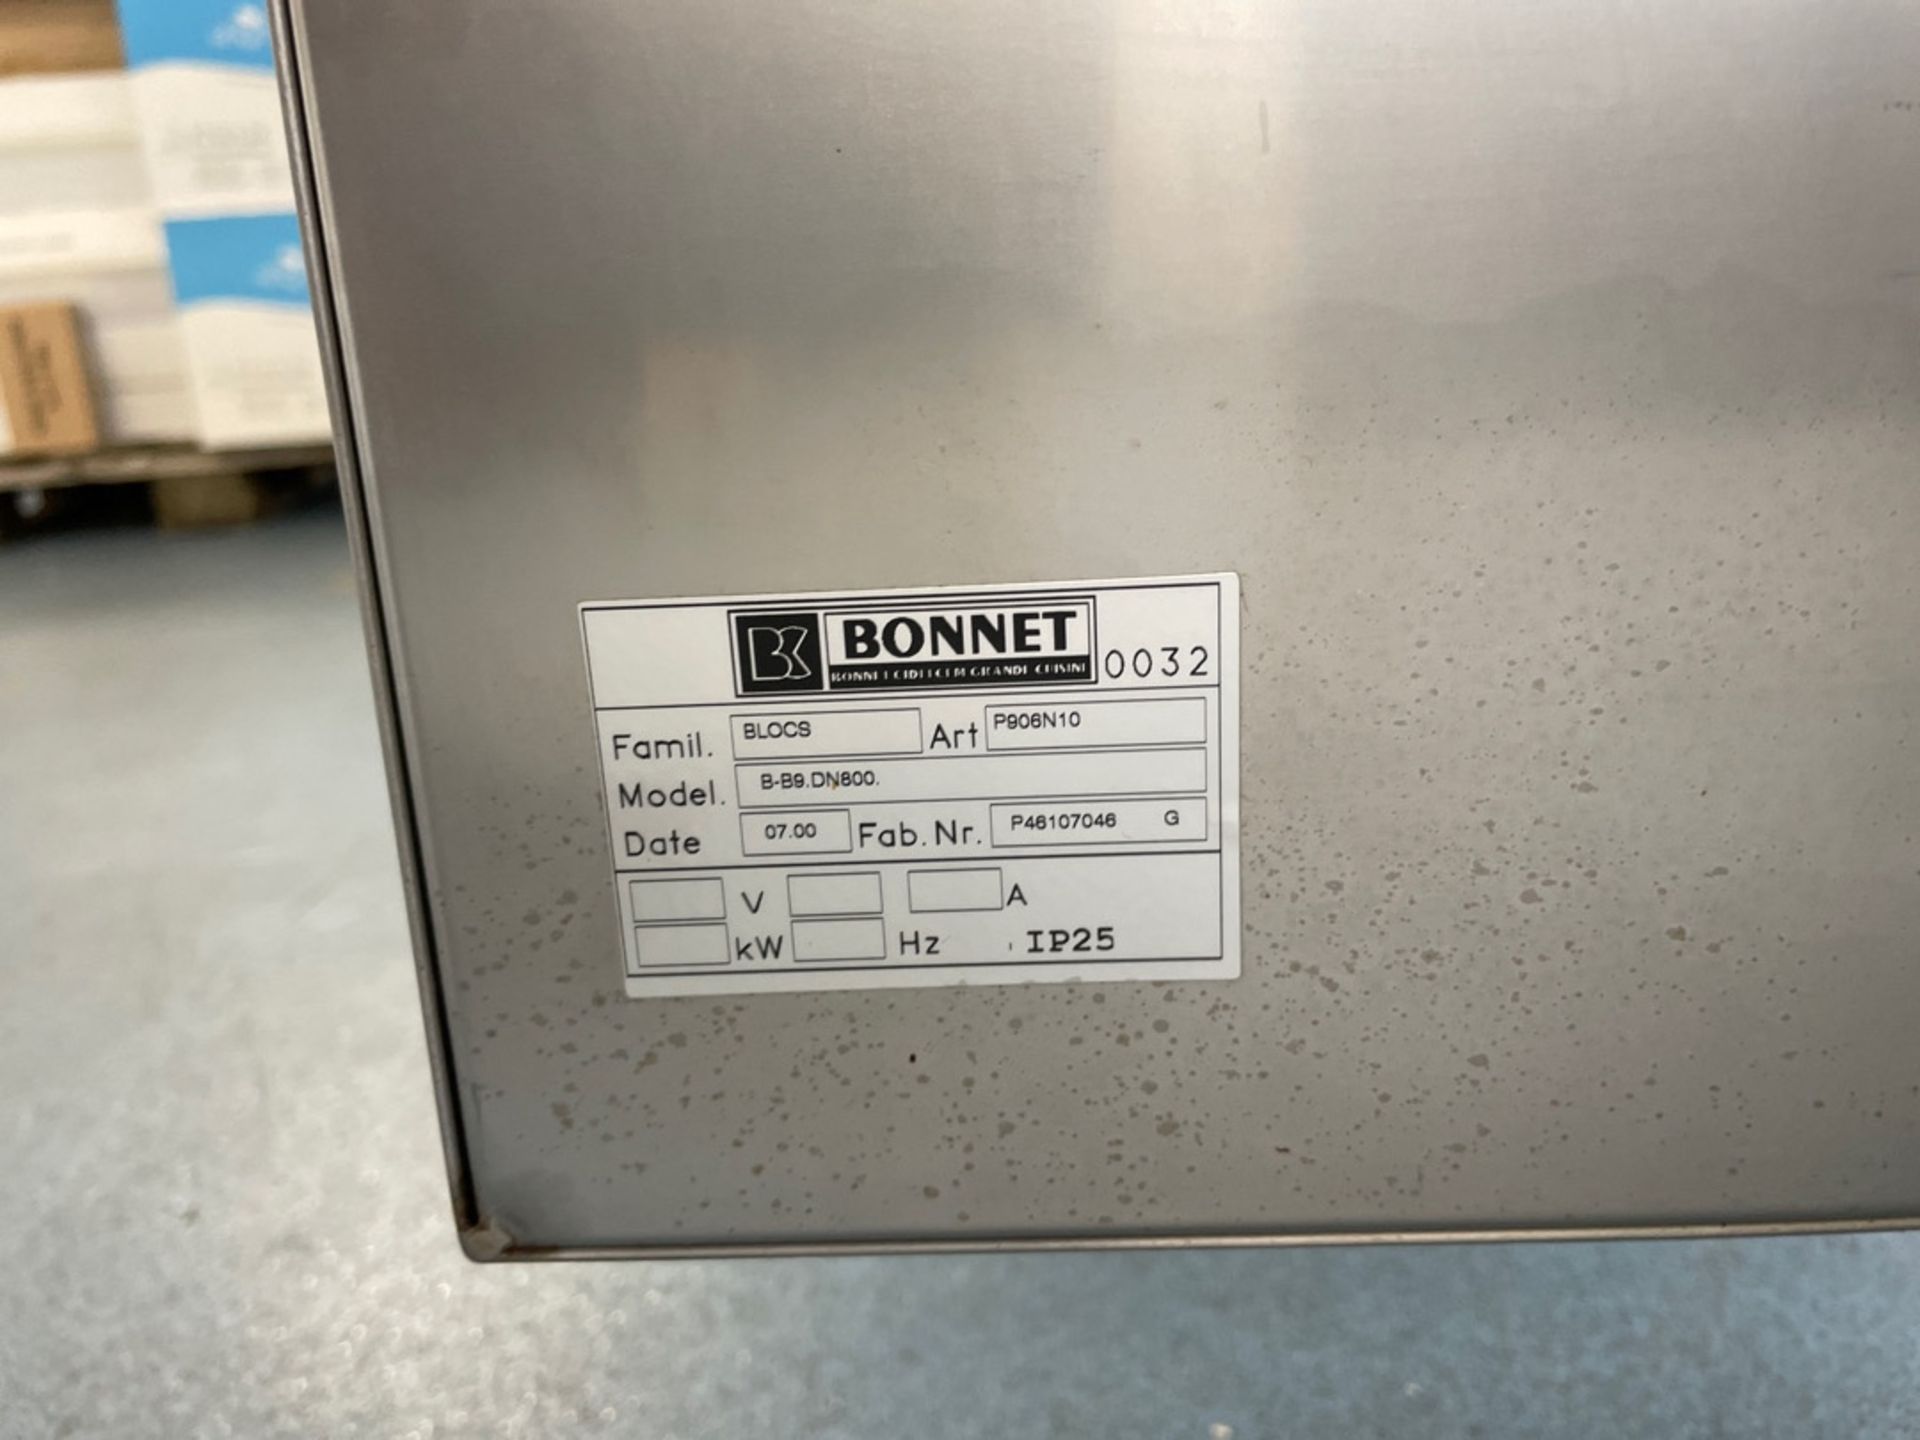 Bonnet Stainless Steel Storage Cabinet - Image 2 of 3